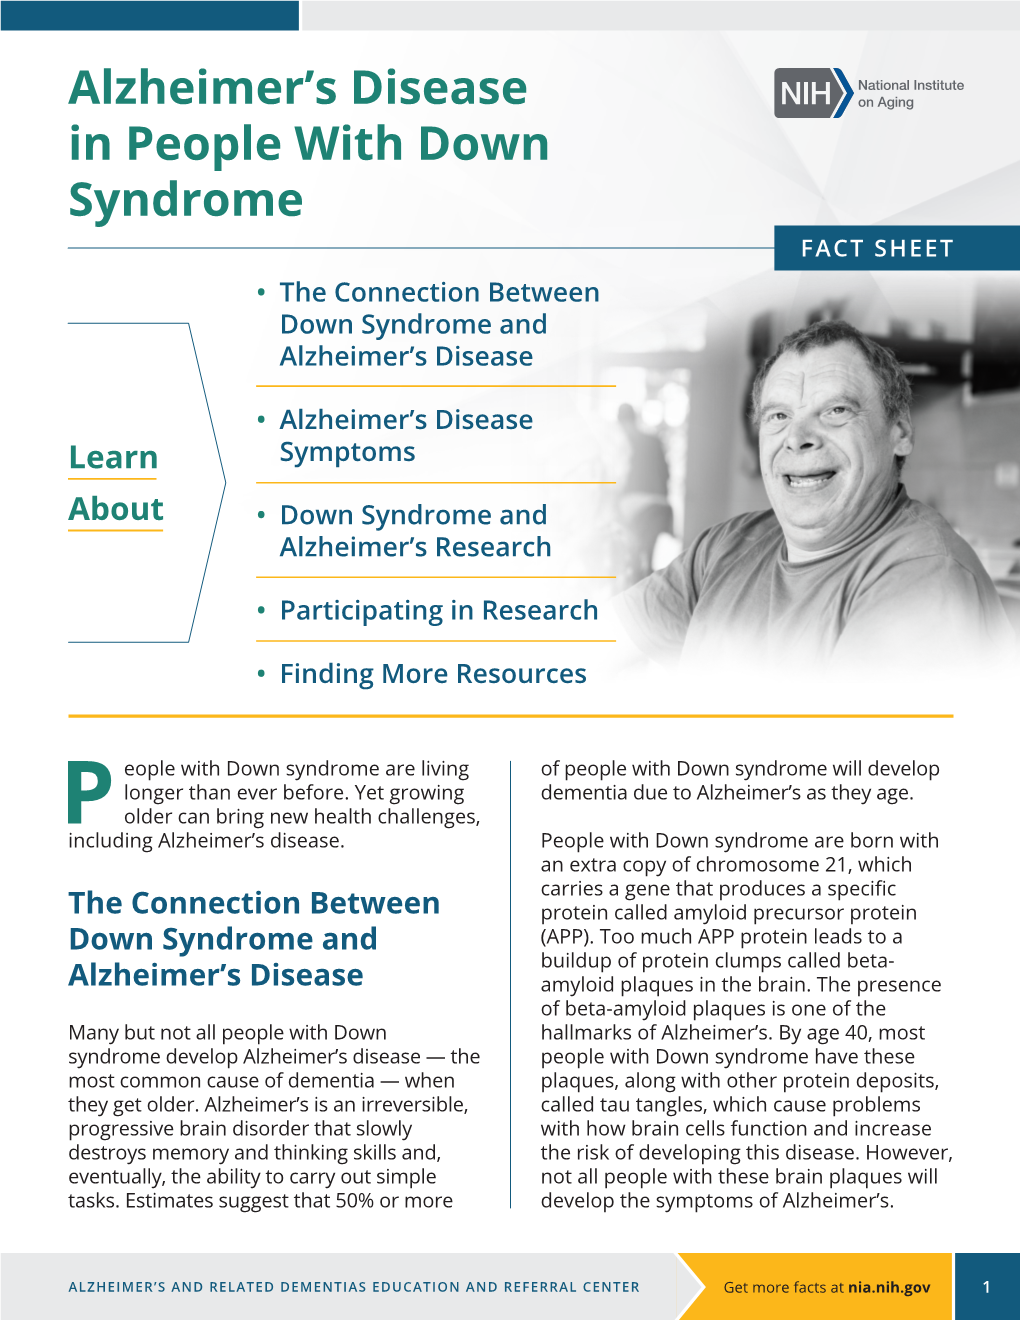 Alzheimer's Disease in People with Down Syndrome